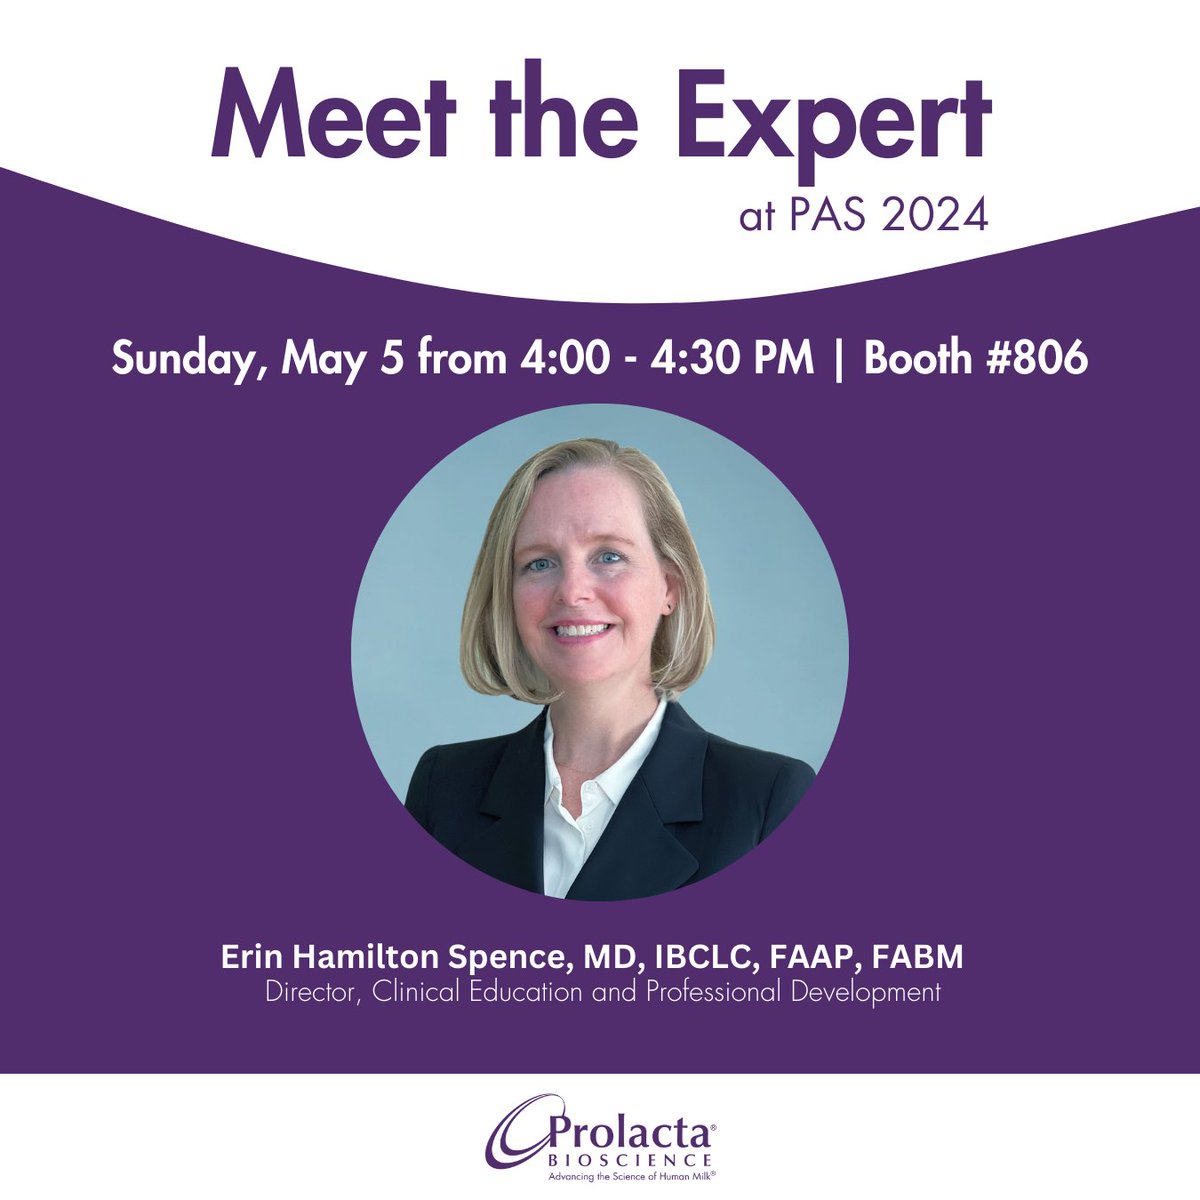 Join us at #PAS2024 for our 'Meet the Expert' session. Meet Dr Erin Hamilton Spence from our Medical Education team for insightful discussions on neonatal care and the clinical benefits of an #ExclusiveHumanMilkDiet.